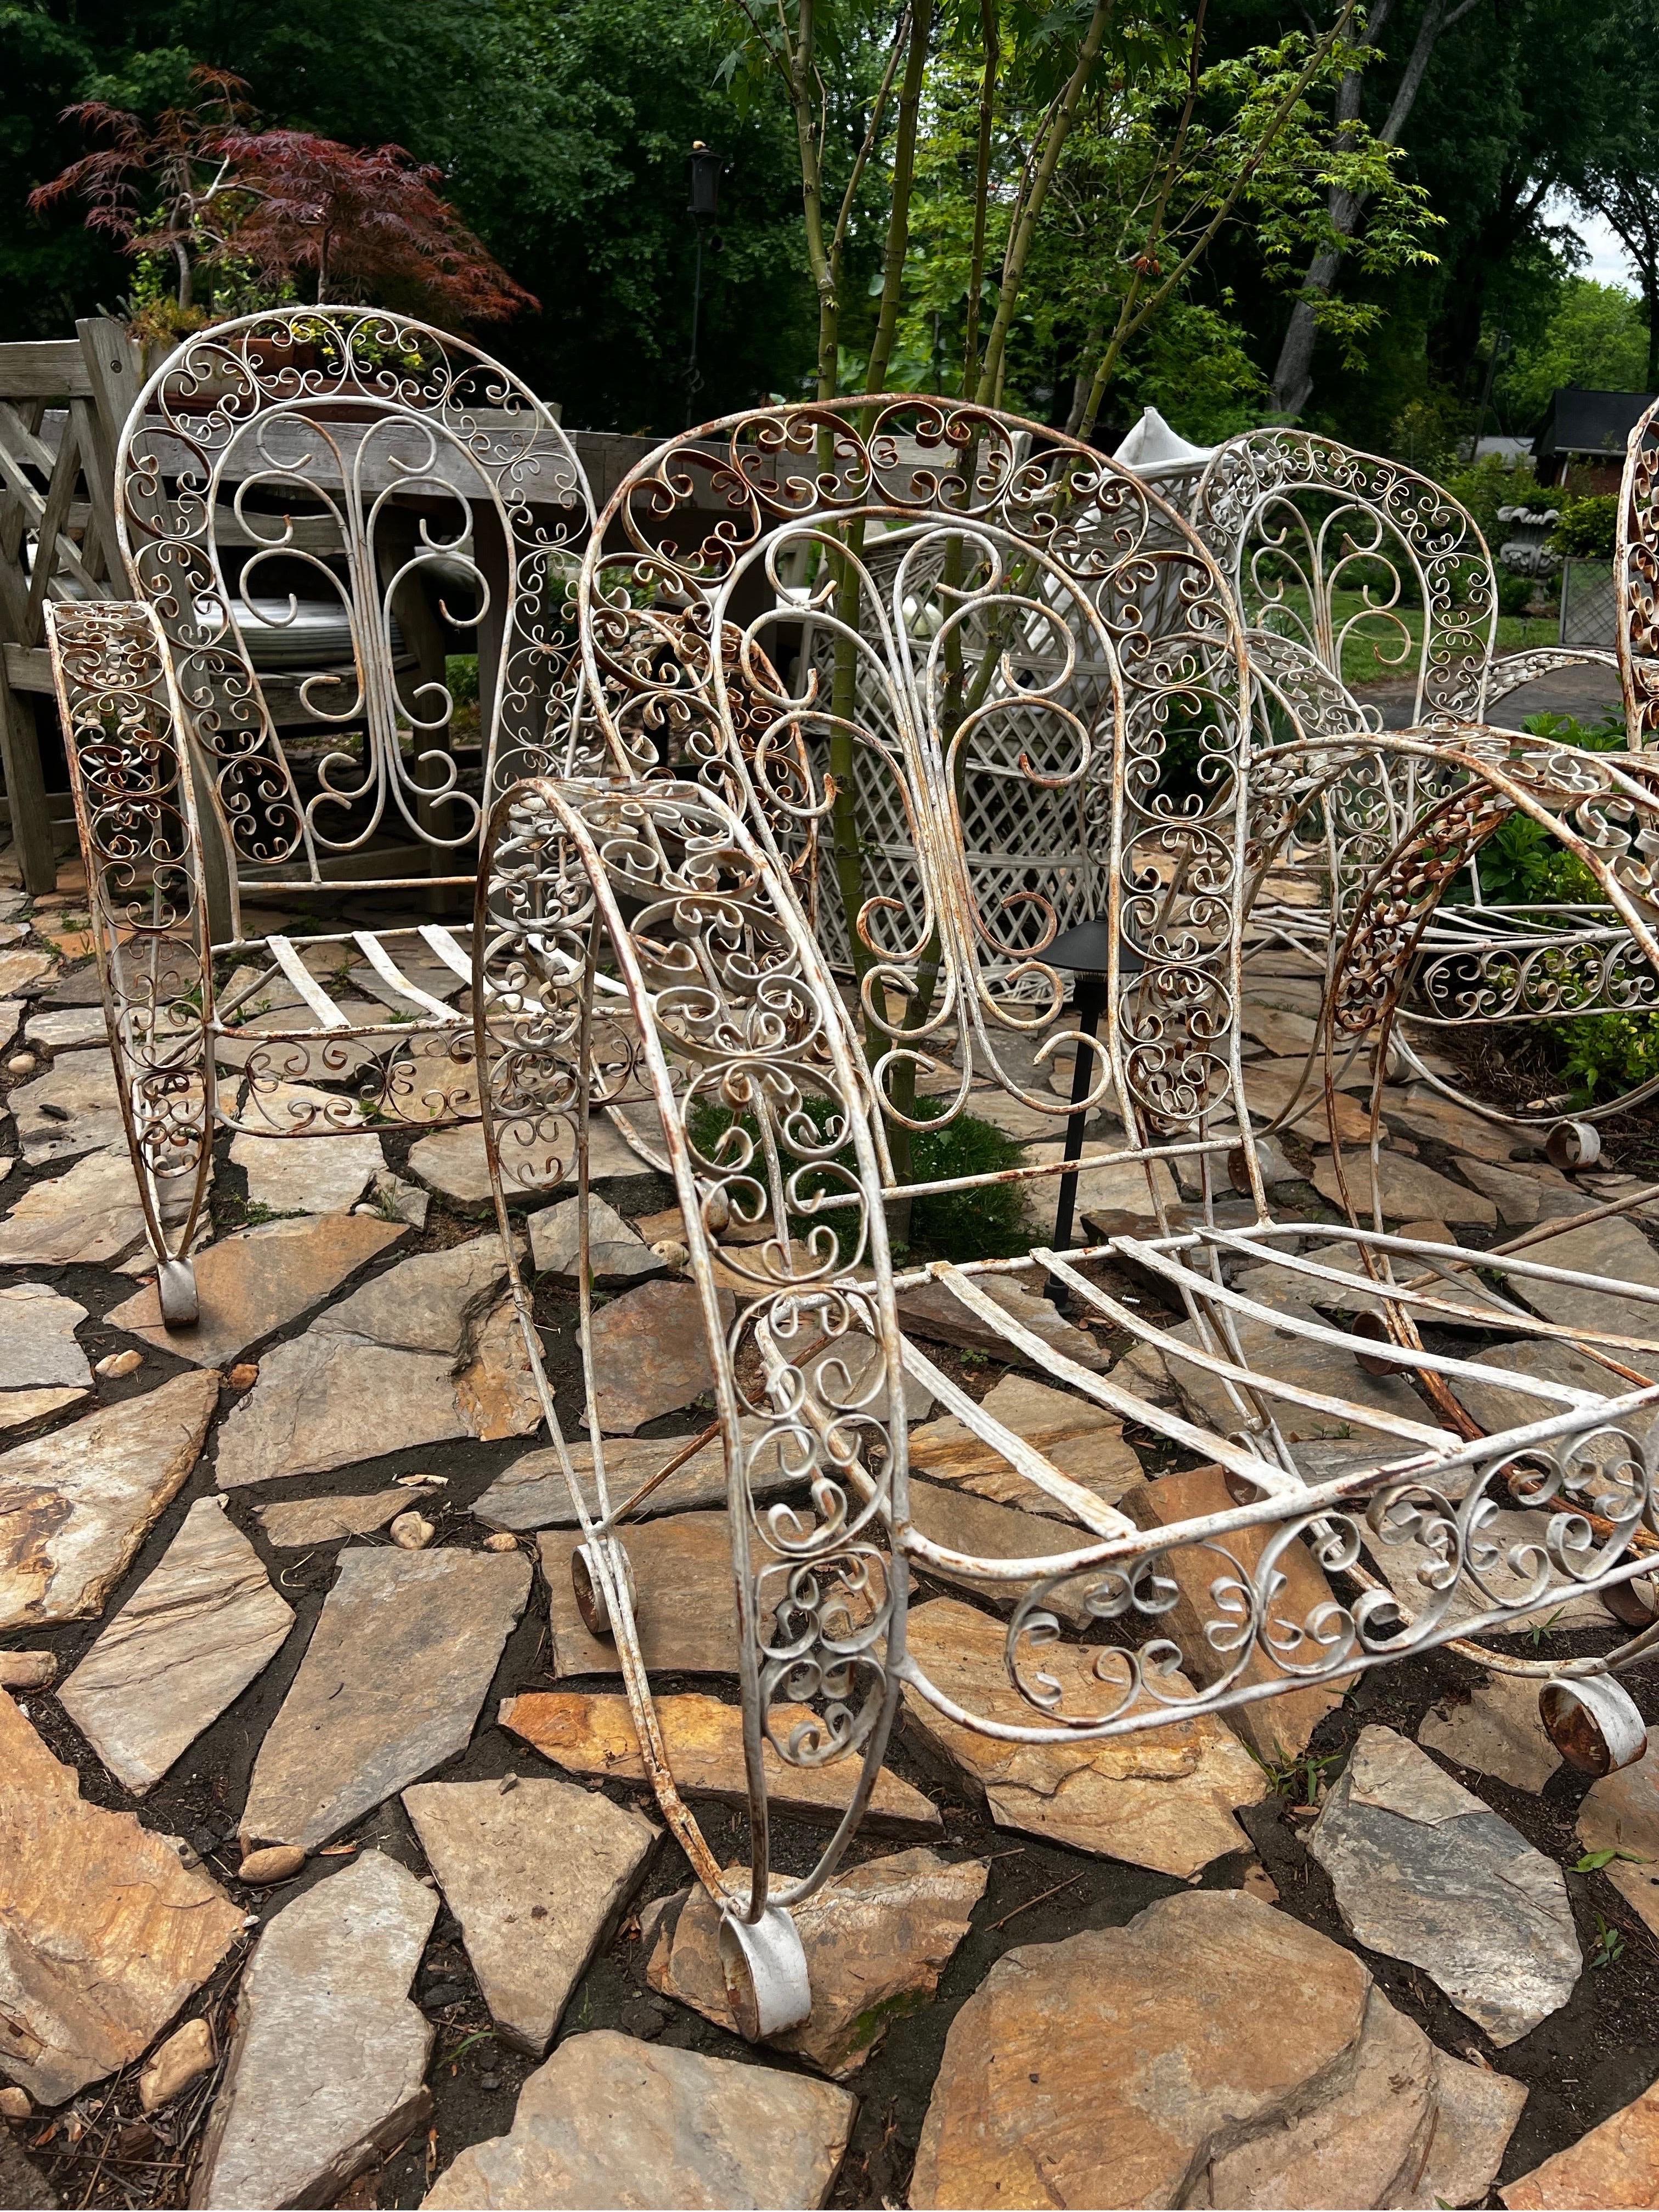 Rare Set of 4 Antique Iron French armchairs in the style of Jean-Charles Moreux.
Indoor/Outdoor patio set.  
Each chair measures approx 24 w x 27 D x 33 h x 14.5 seat height

We will be auctioning these chairs as our ironworker is backed up and they